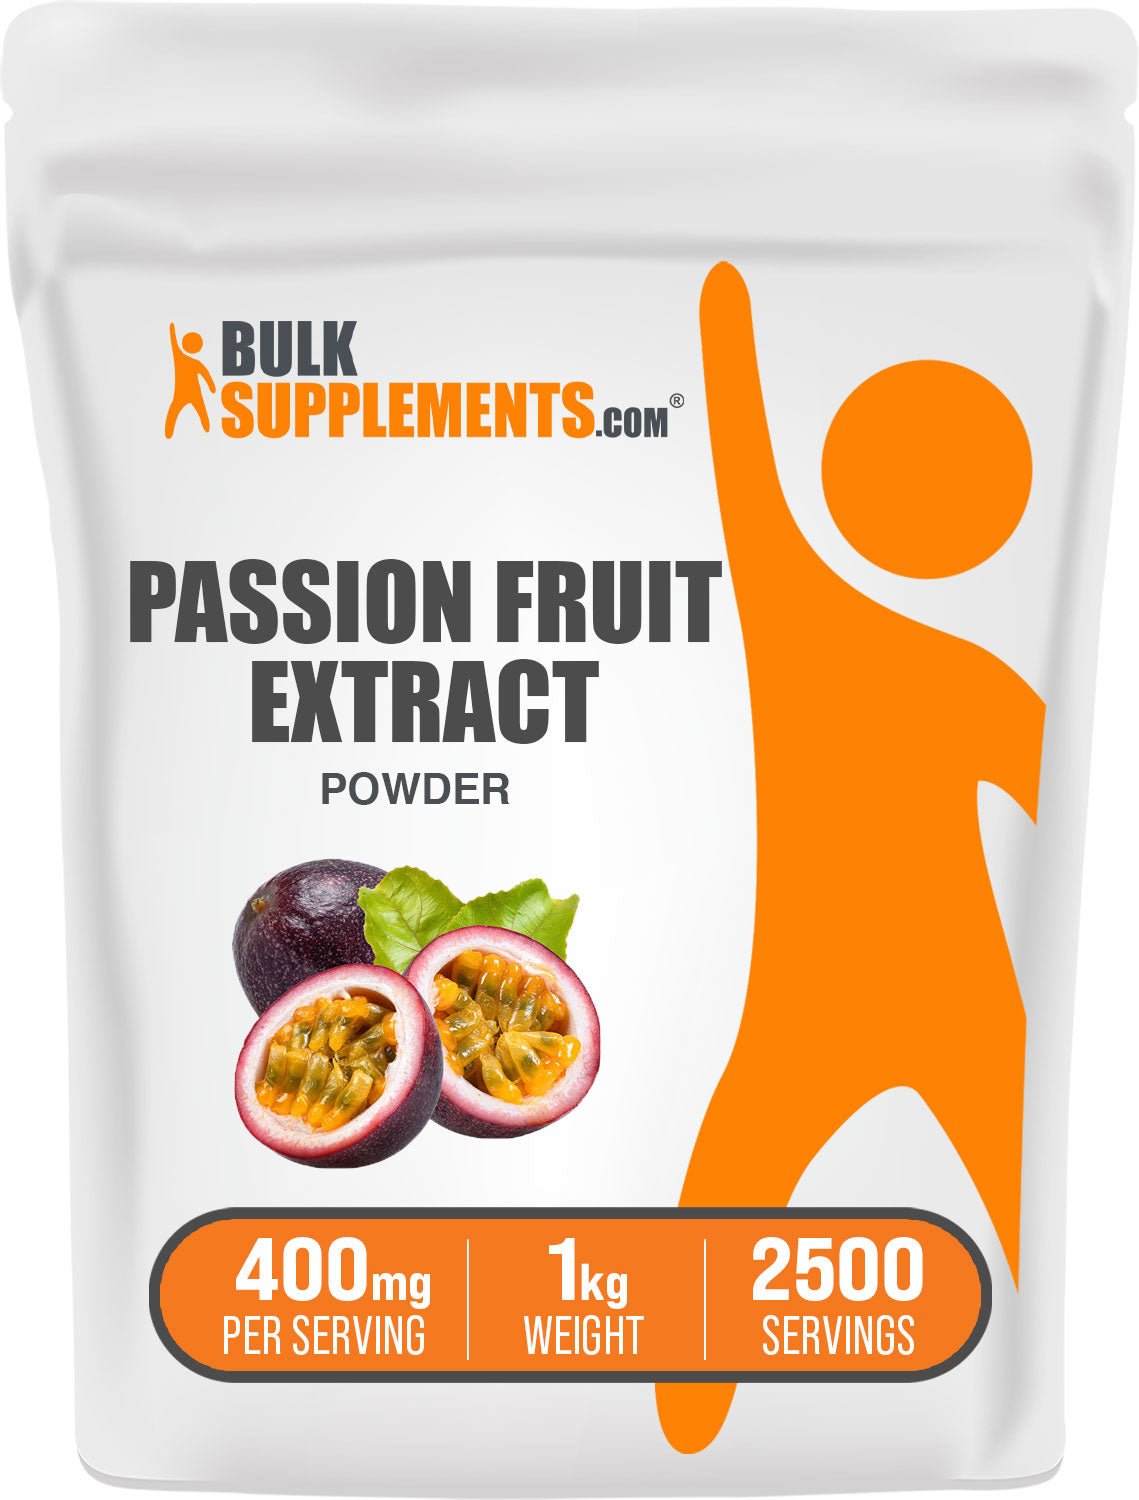 Passion Fruit Extract 1kg Bag